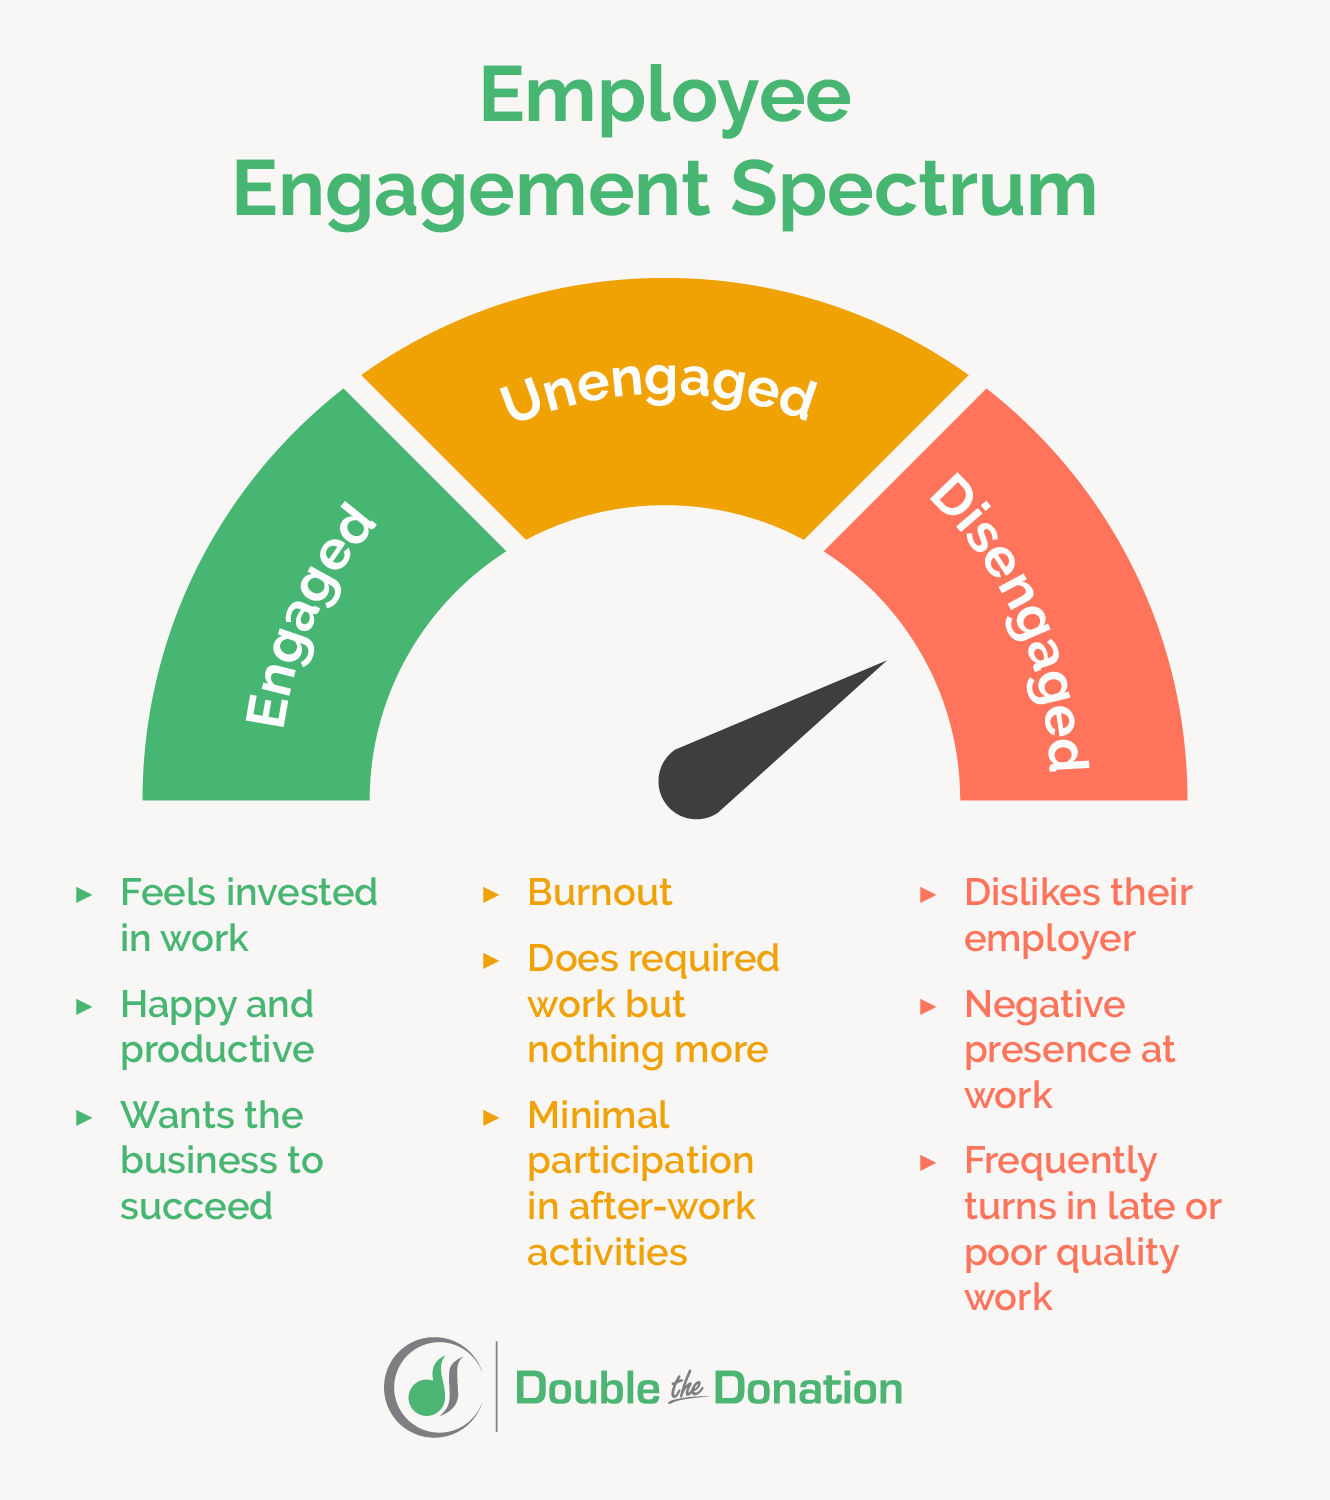 The image depicts the spectrum of employee engagement, detailed below.